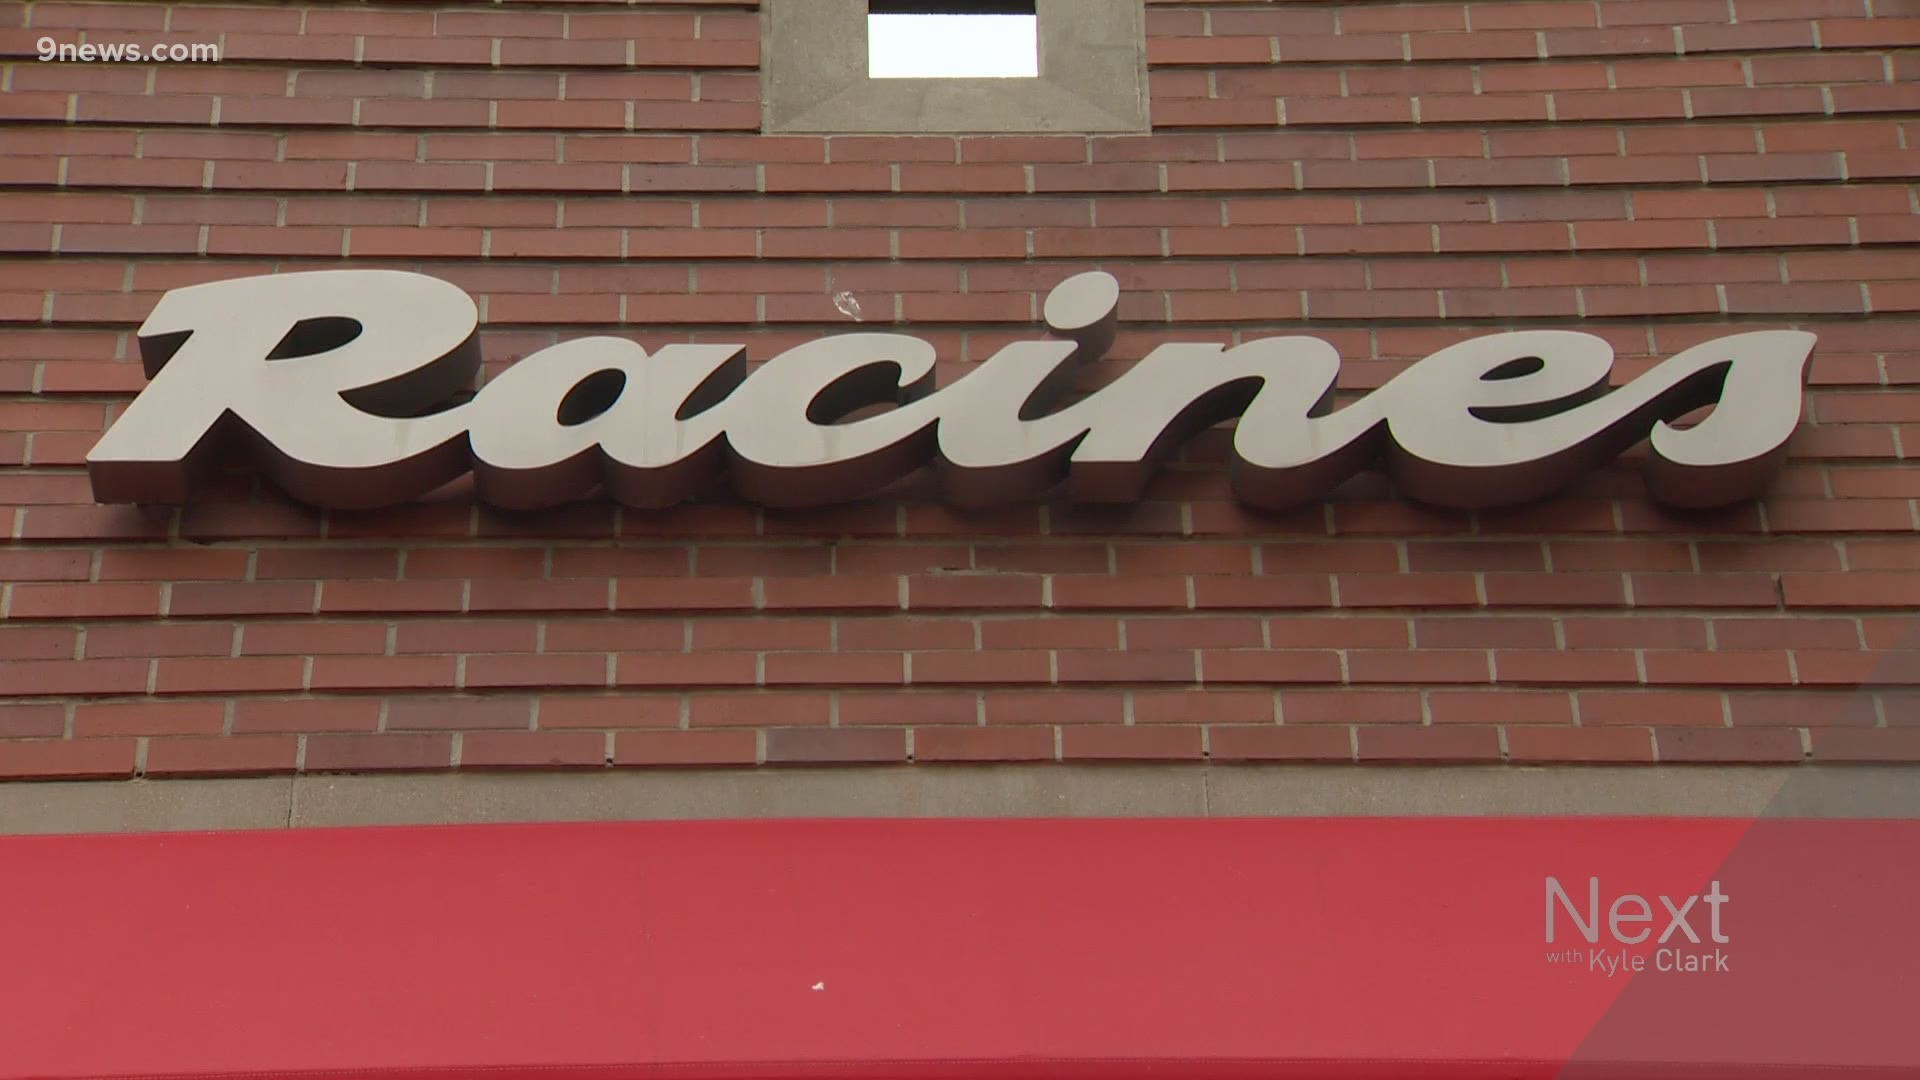 Racines restaurant announced it would close earlier than planned. With its Capitol Hill location, it'd been a hangout for many Colorado journalists and politicians.